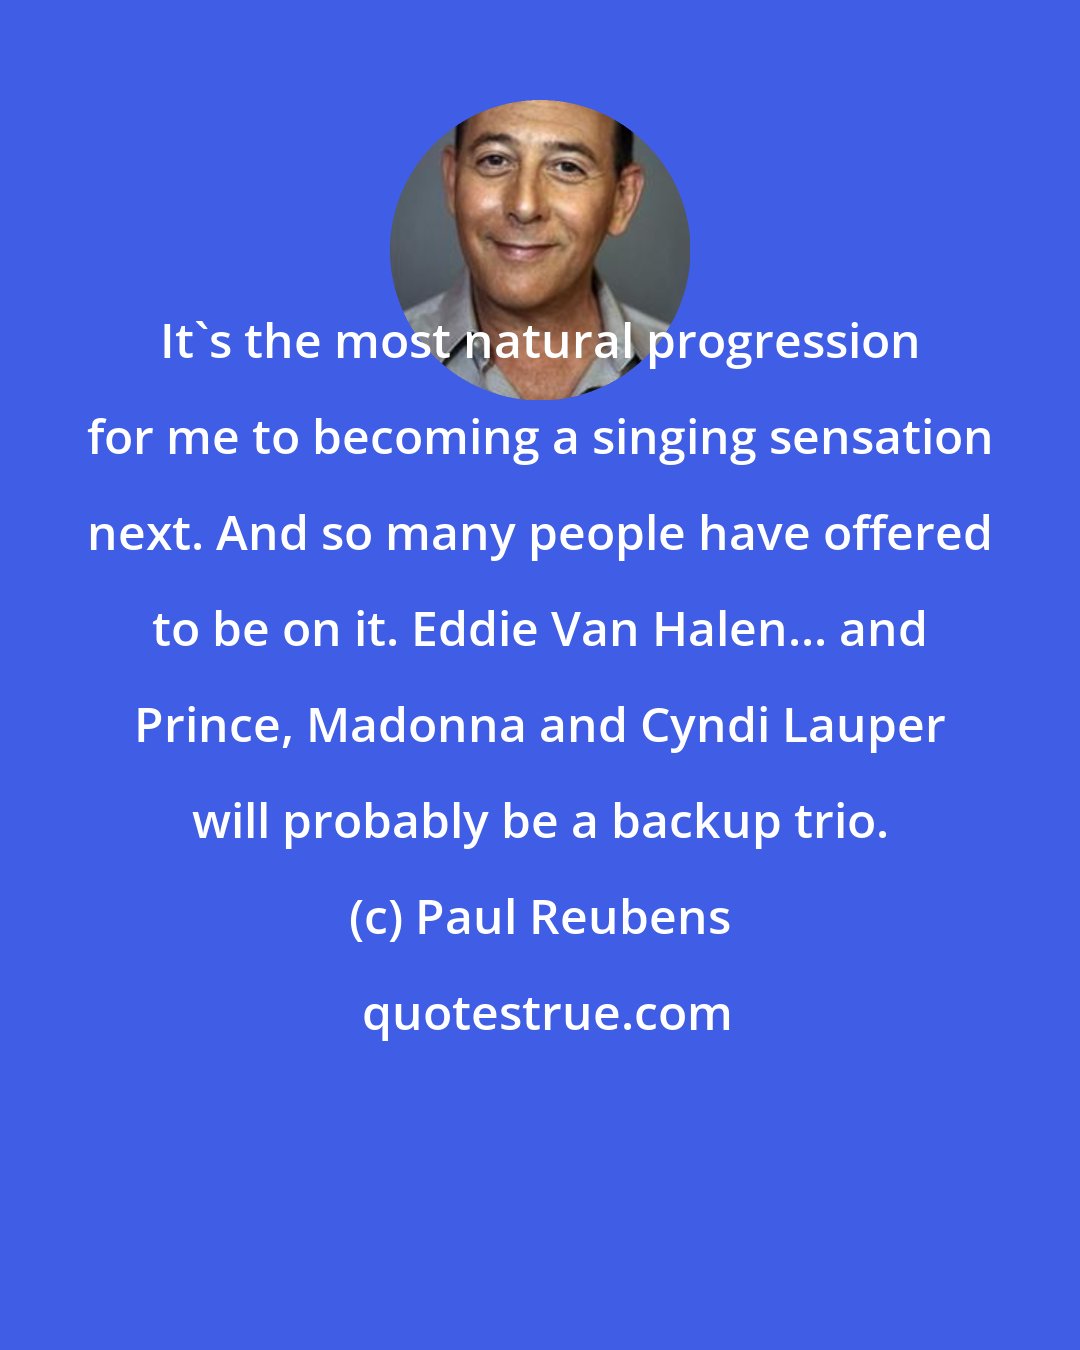 Paul Reubens: It's the most natural progression for me to becoming a singing sensation next. And so many people have offered to be on it. Eddie Van Halen... and Prince, Madonna and Cyndi Lauper will probably be a backup trio.